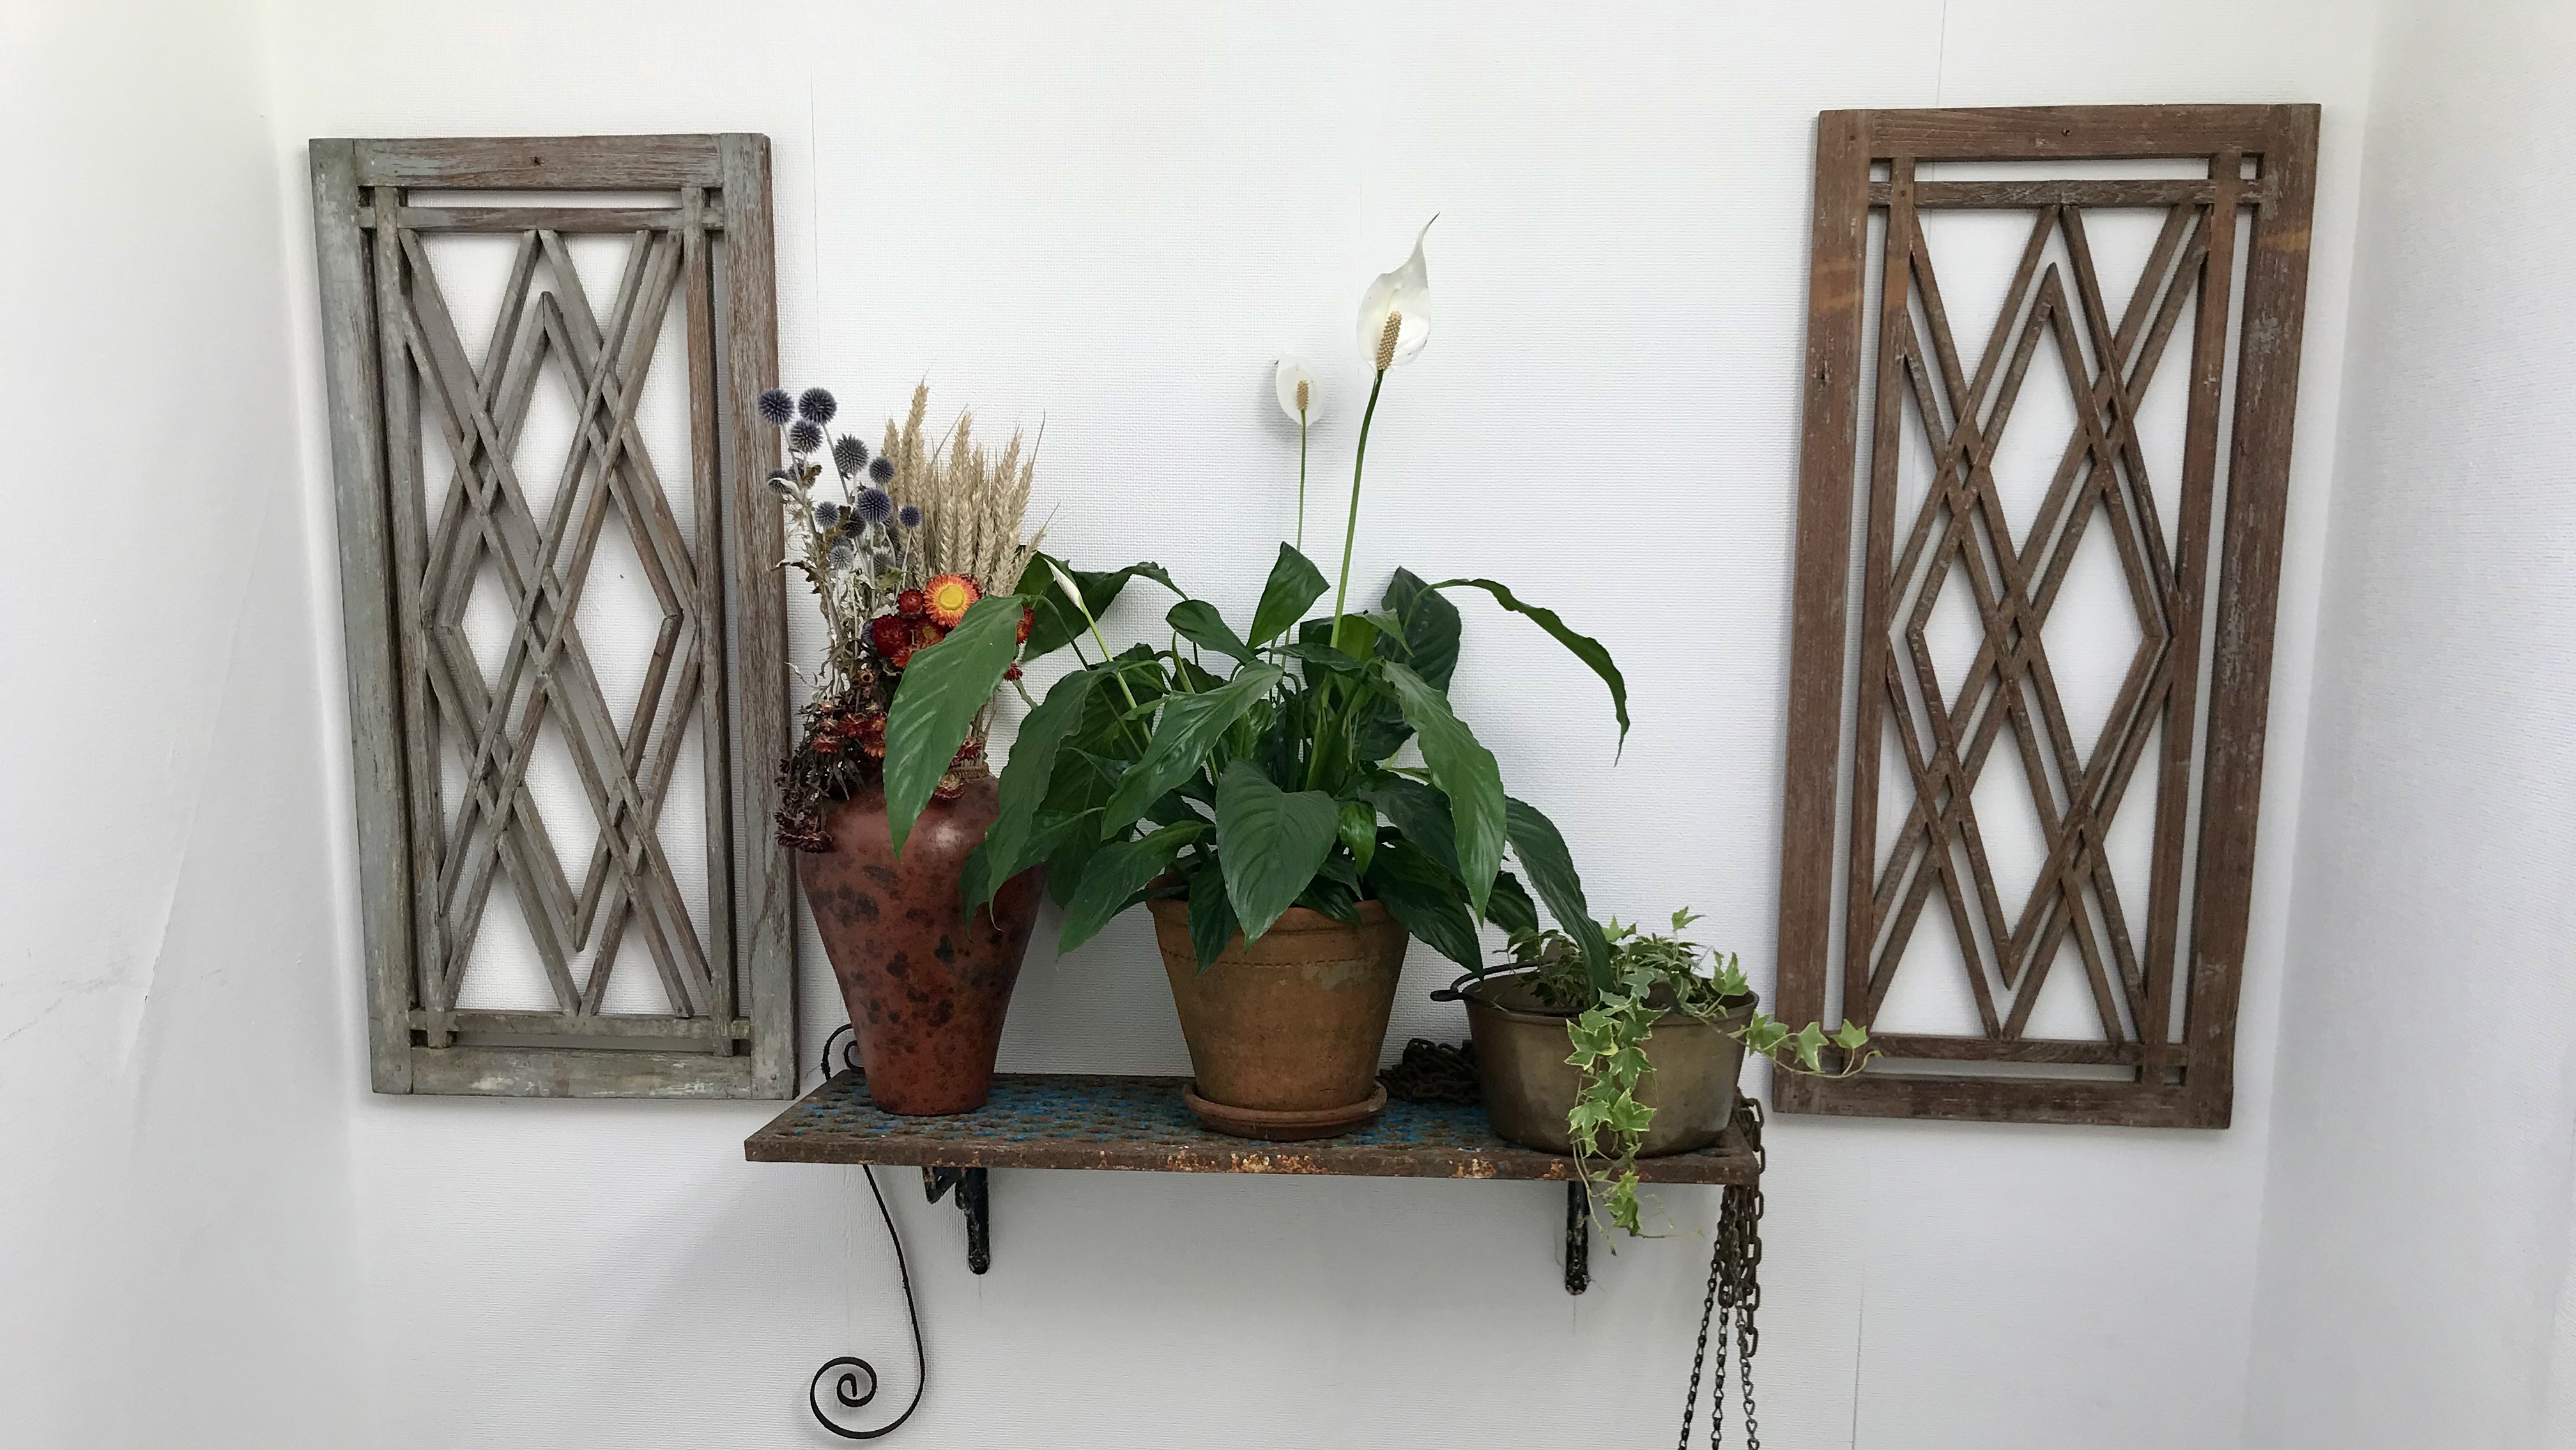 Wall display with plants